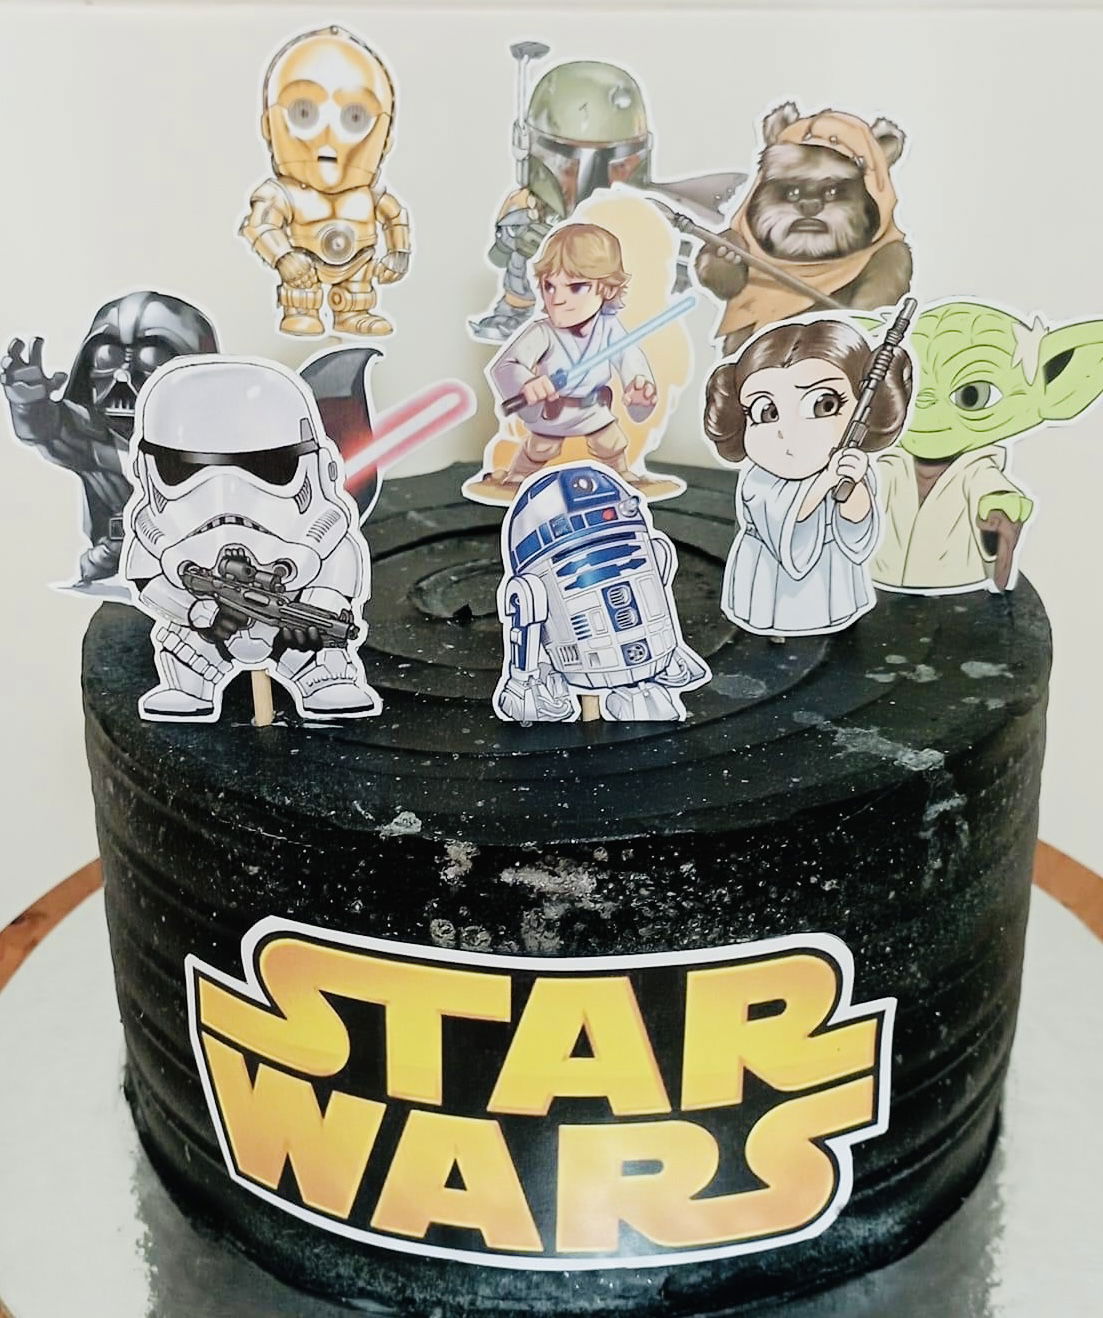 2 Layer Funfetti Star Wars Cake with Buttercream Frosting and Edible Image